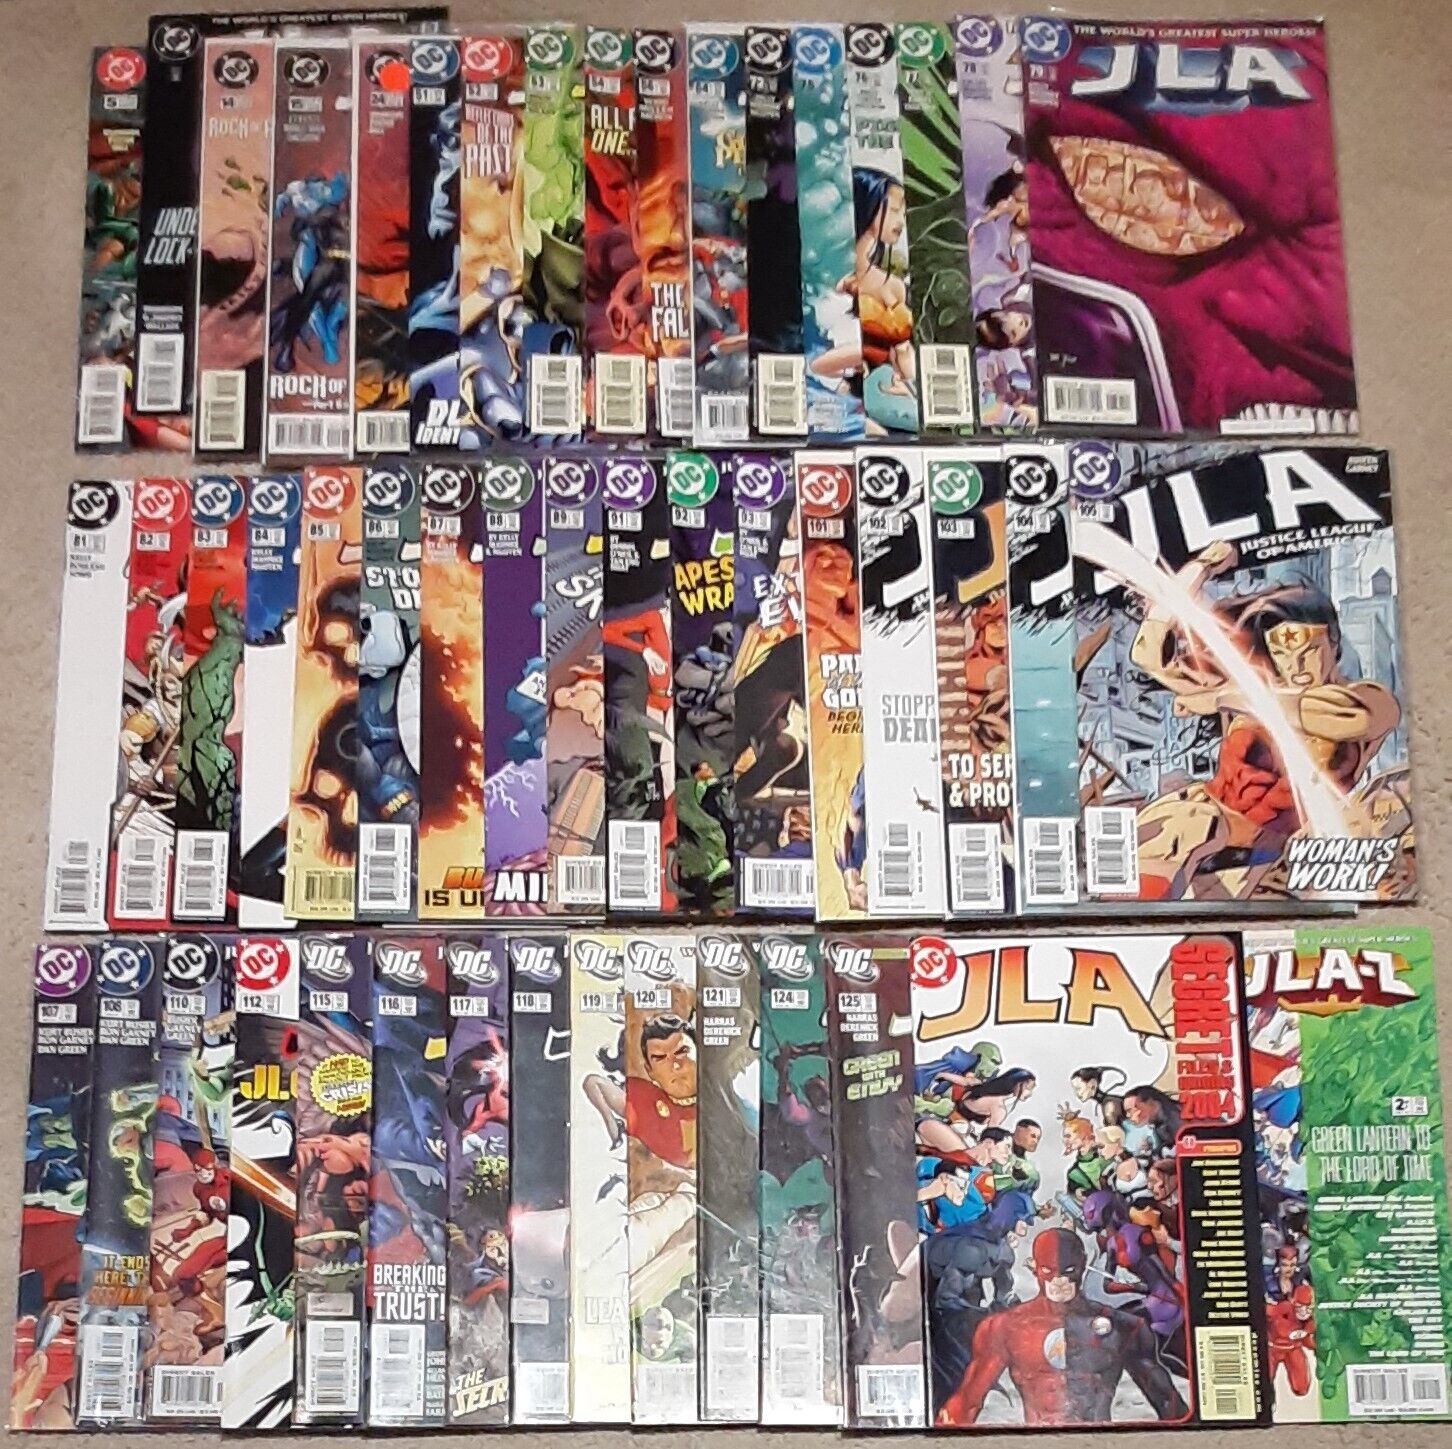 JLA Vol 1 #5-125 (49-Comic Lot) VF/NM 1997 DC See Pics For Included Issues